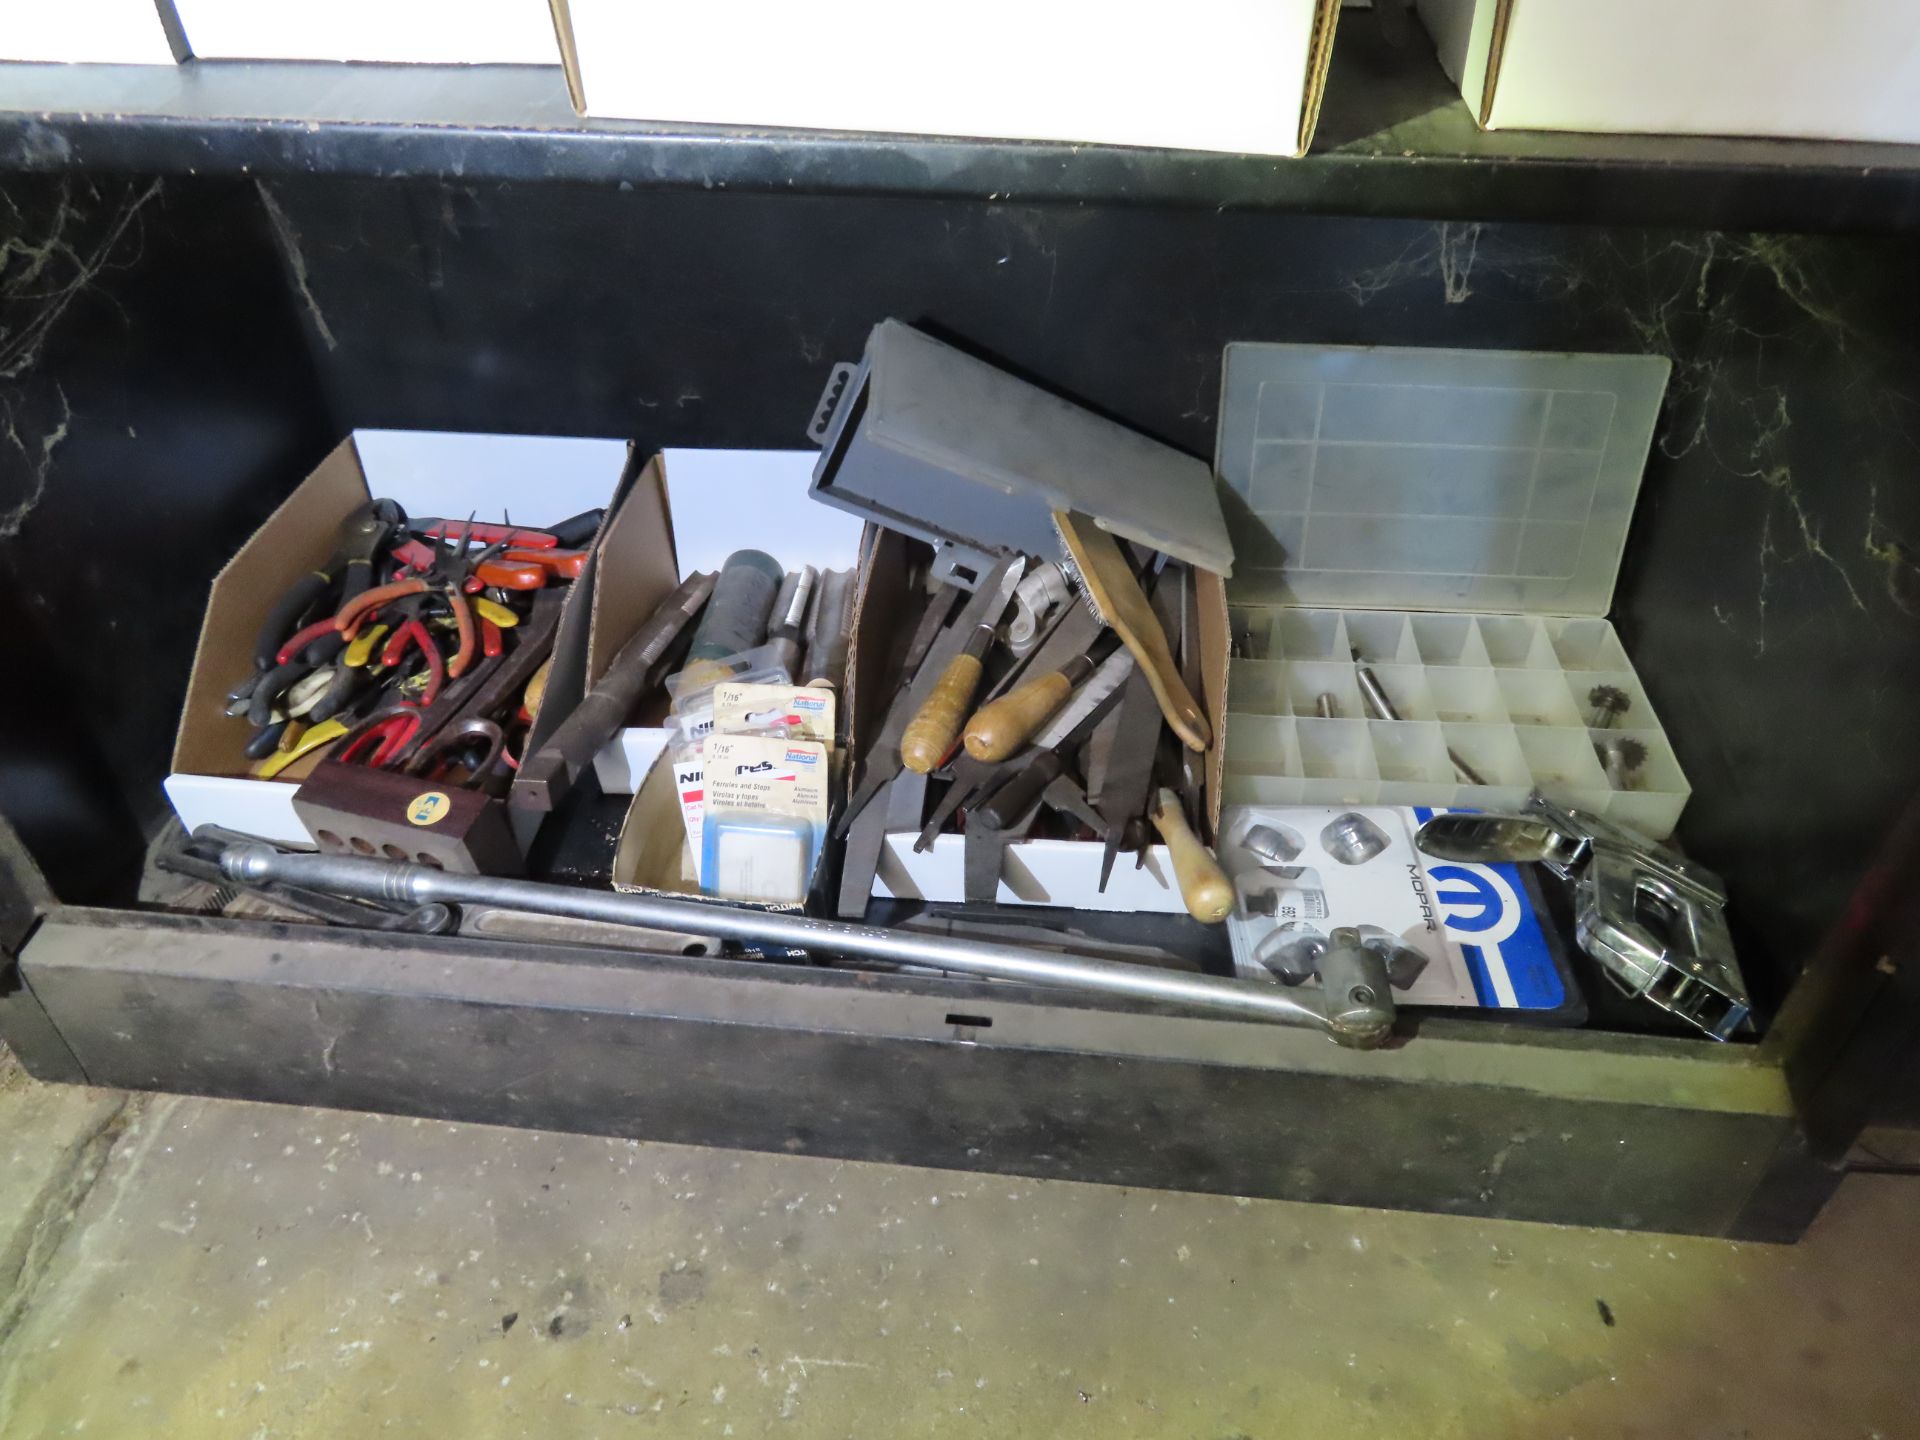 Metal Cabinet and Tooling Contents, Collets, Wrenches, Files, Drill Sets, Chucks, &d Other Tooling - Image 7 of 7